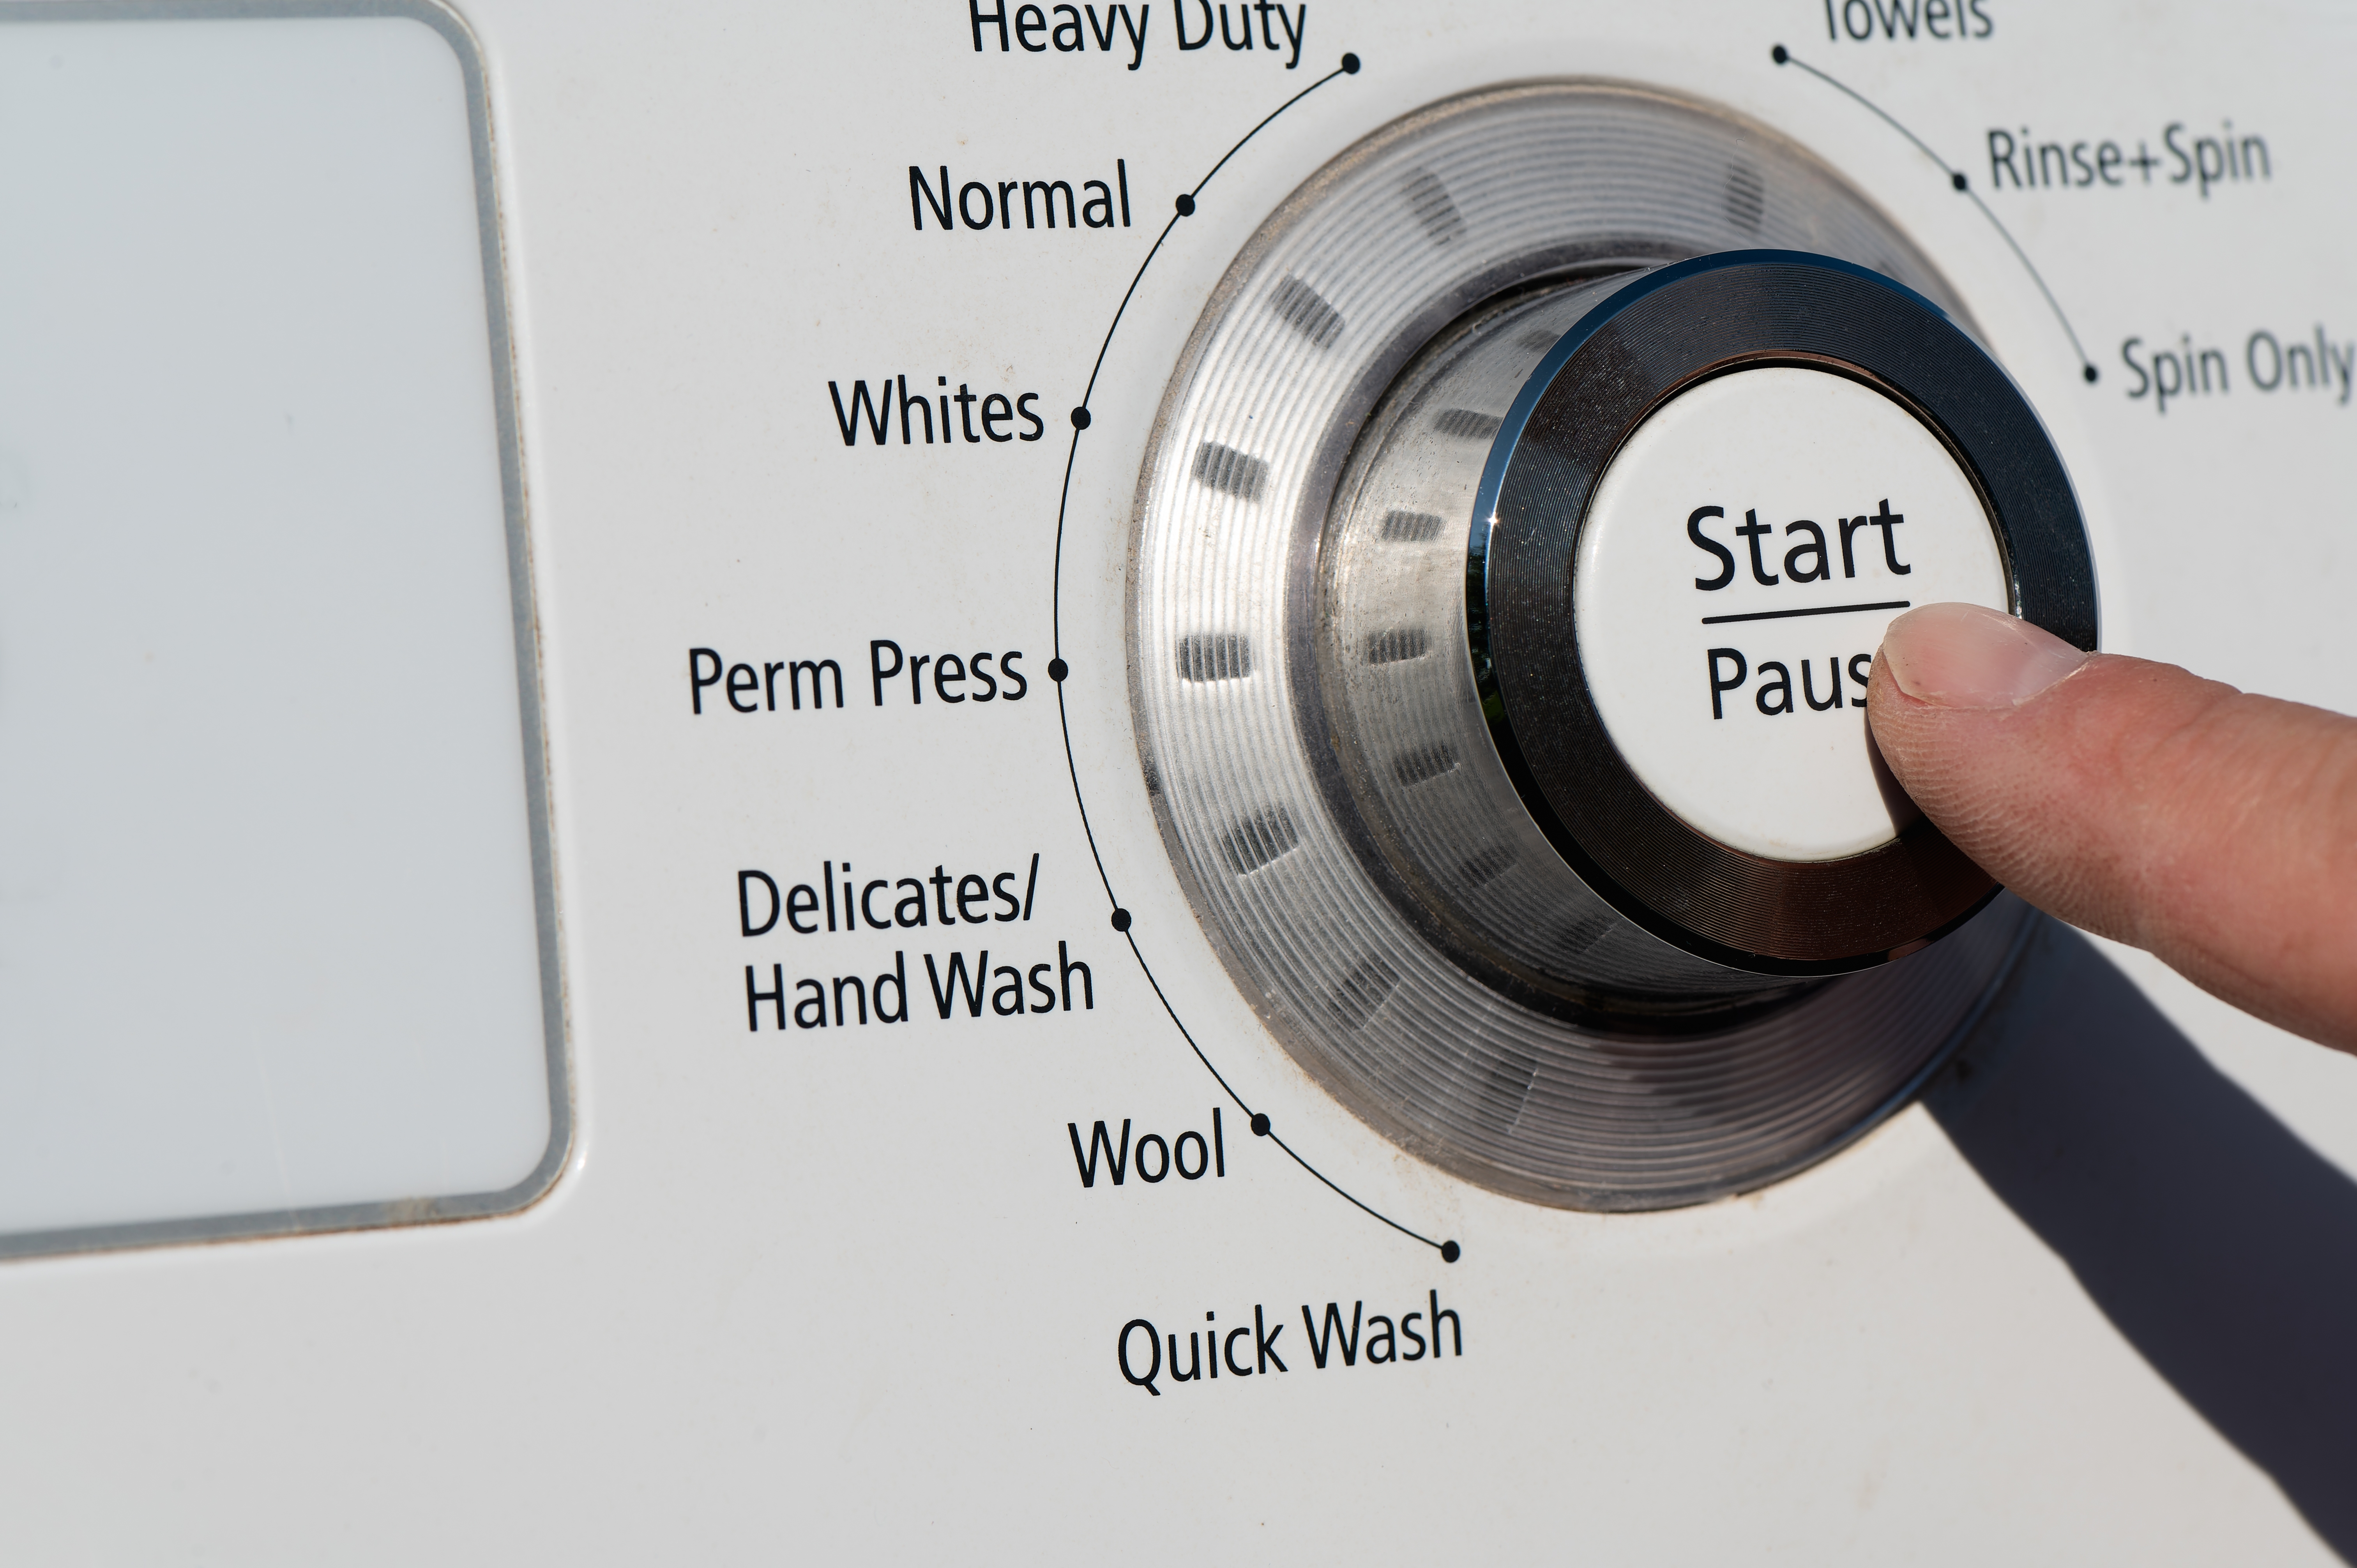 If your machine doesn't have a gentle cycle, use the delicate setting or choose hand wash instead. | Source: Shutterstock